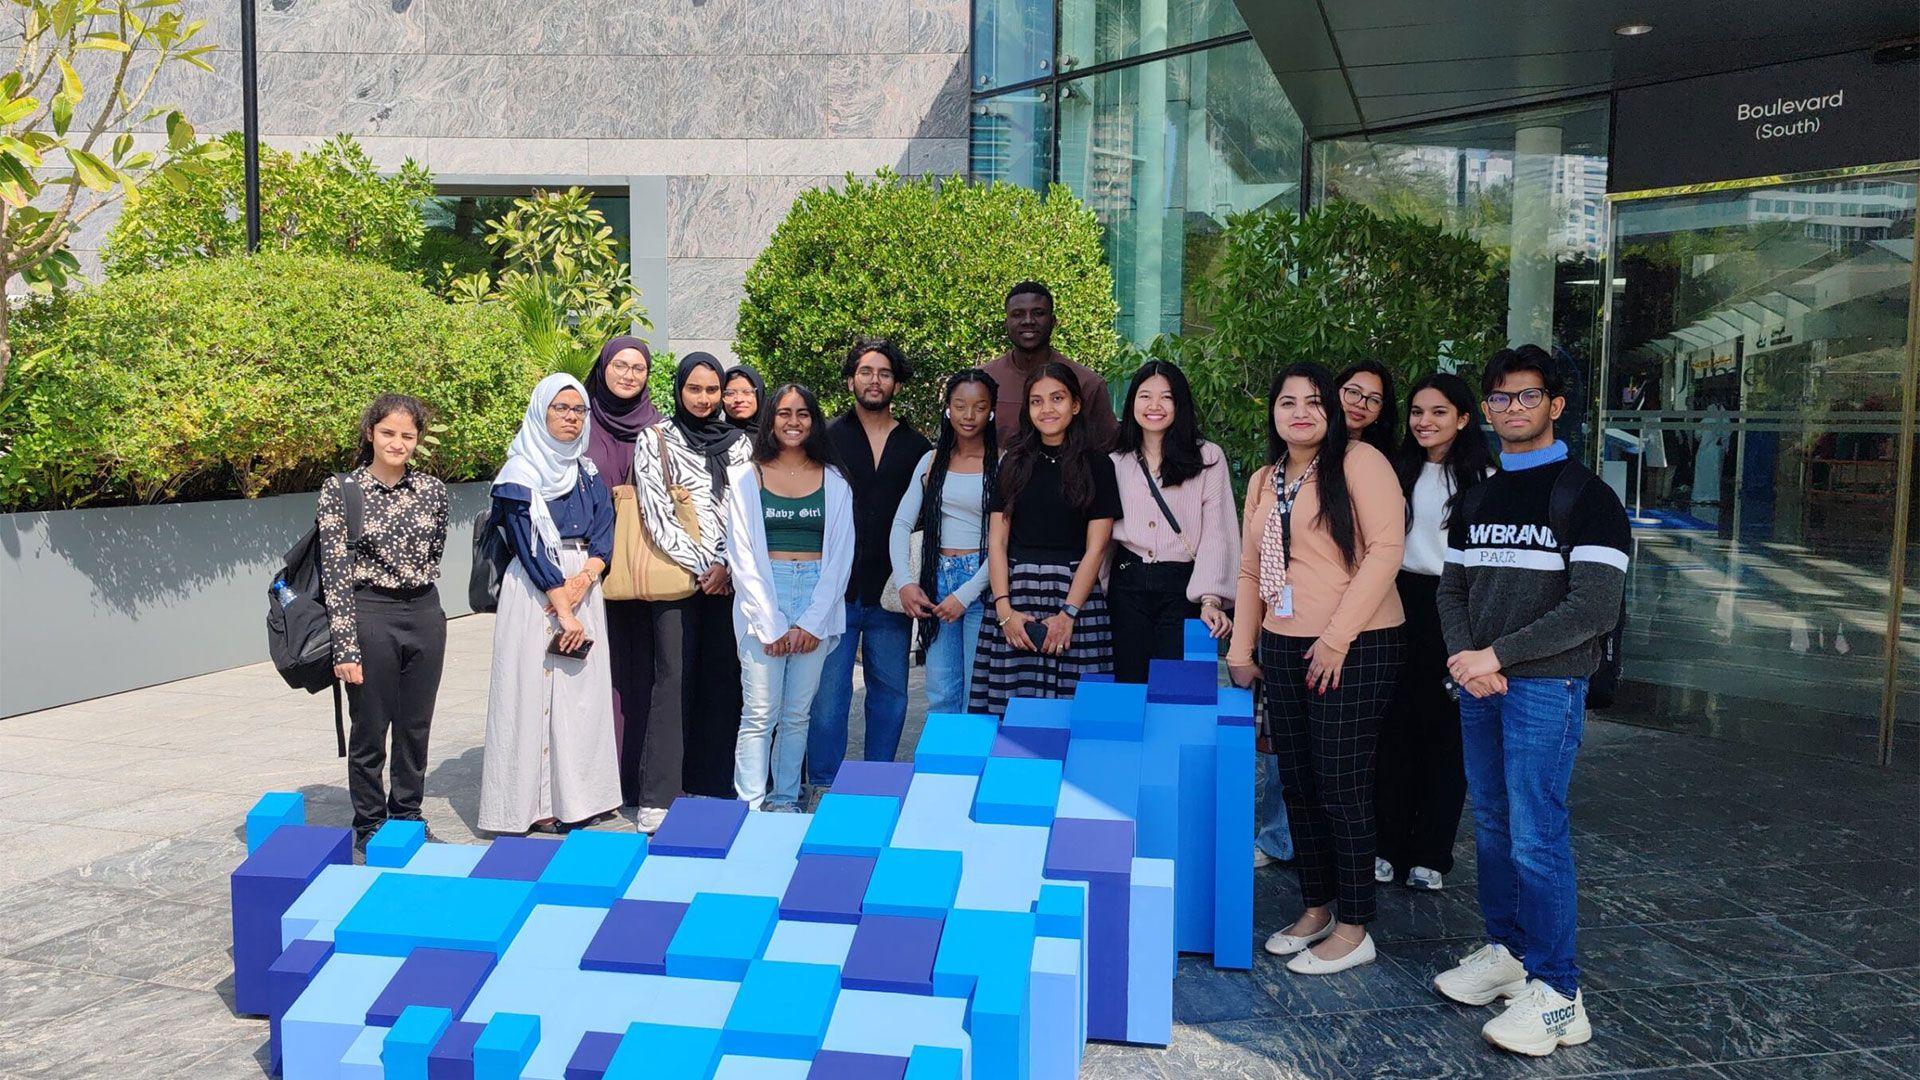 In March, both the third-year January cohort and first-year September cohort students embarked on a field trip to explore the UAE Innovates Exhibition and the DHL Innovation Hub